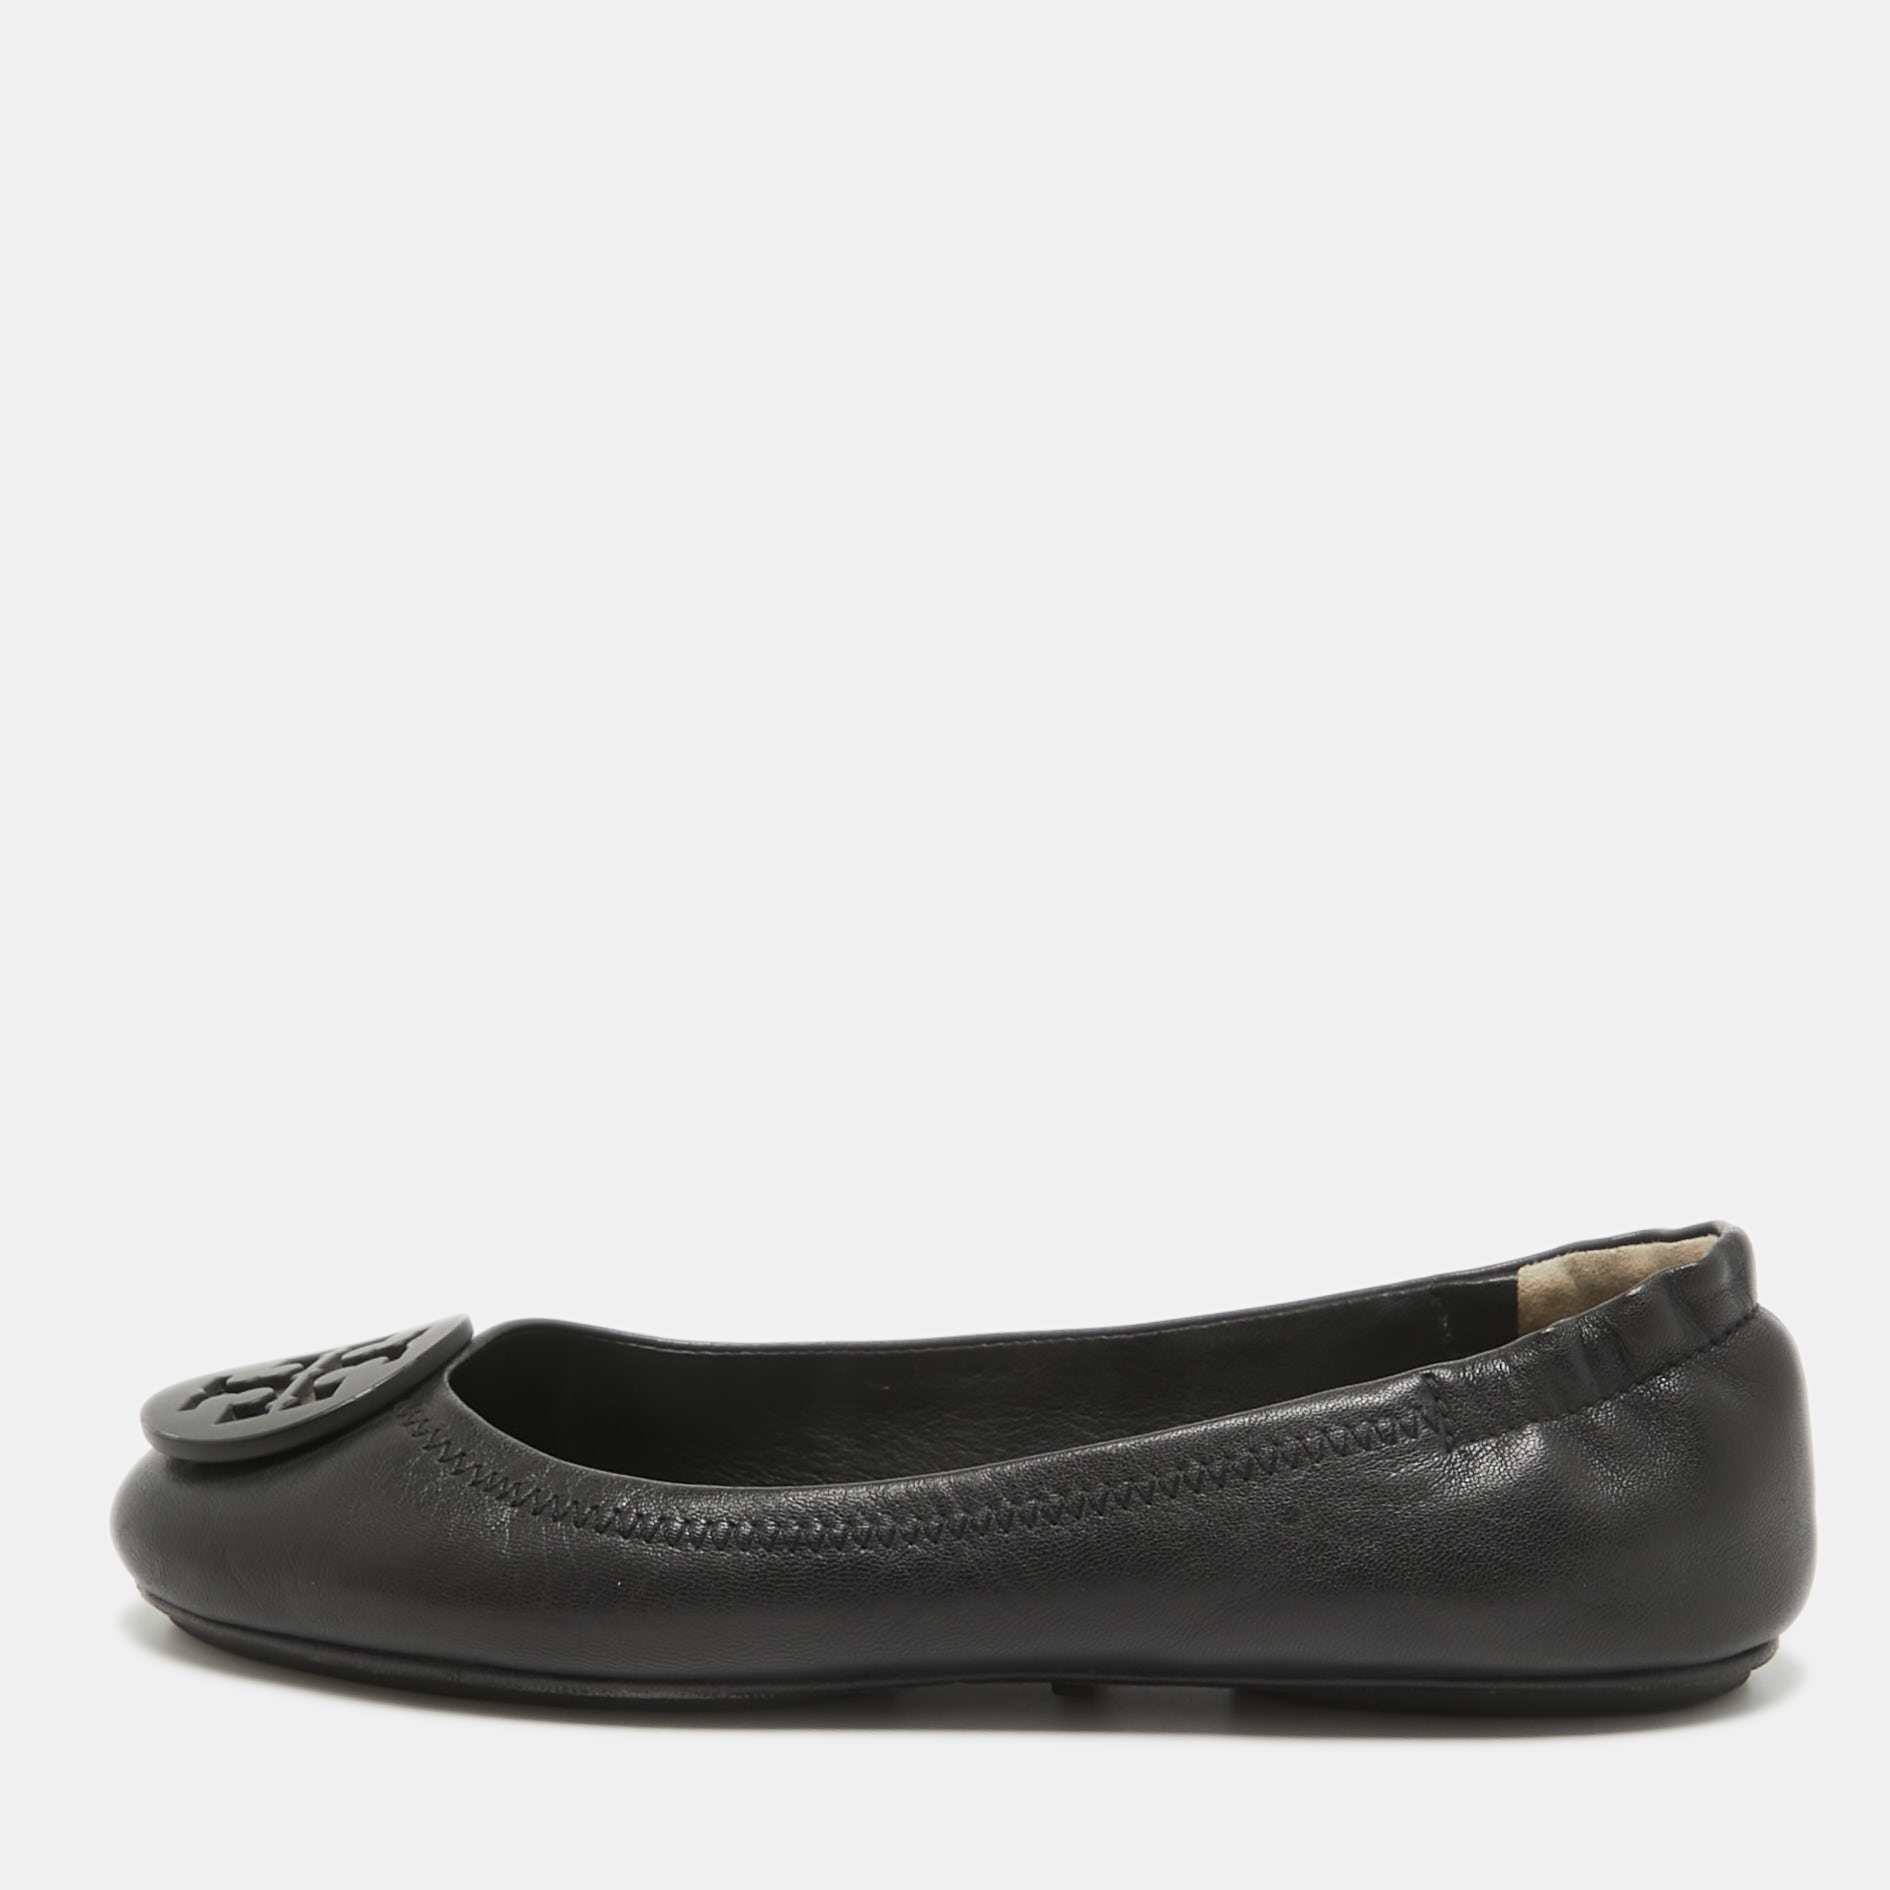 Pre-owned Tory Burch Black Leather Minnie Travel Ballet Flats Size 36